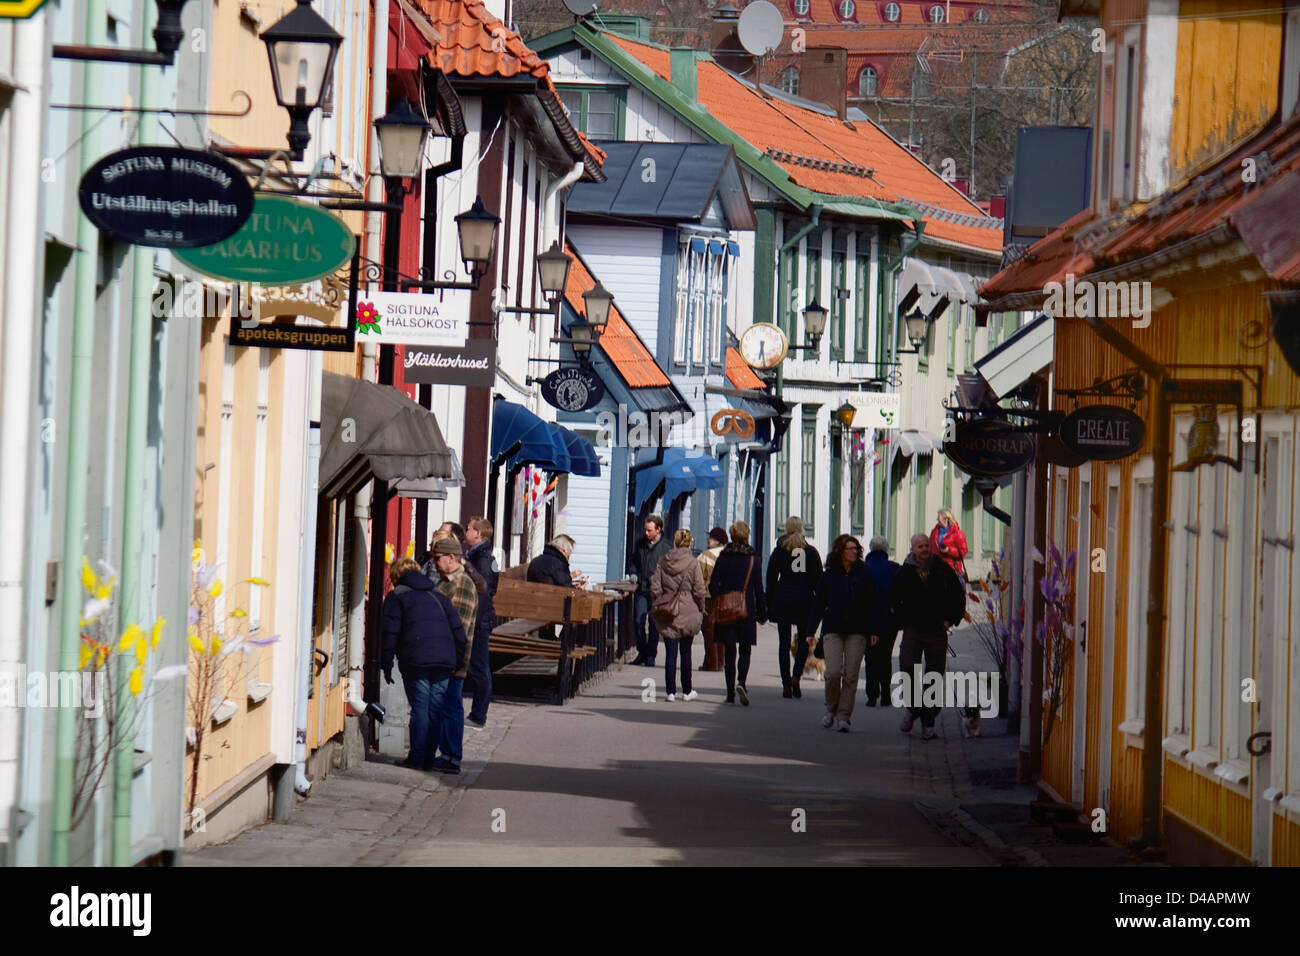 Europe; Scandinavia; Sweden; Swedish; Stockholm; Sigtuna; Village; Town; Wood; House; Typical; Street; People; Person; Walking; Stock Photo